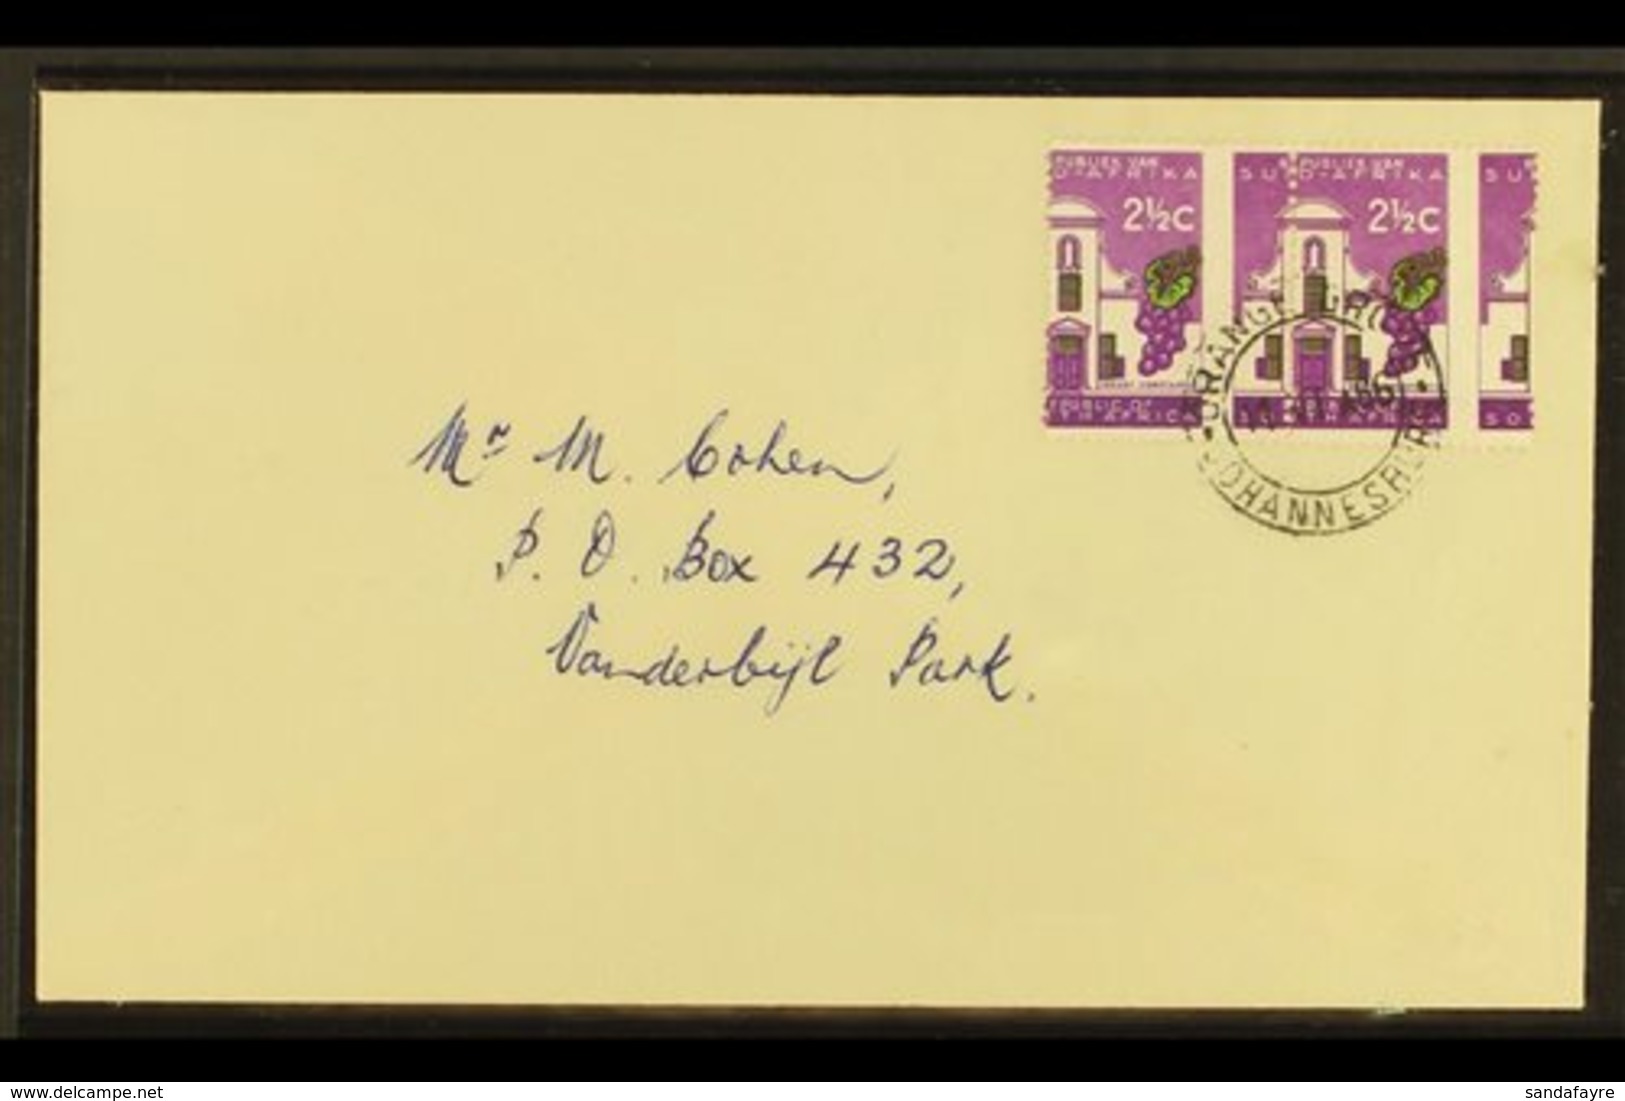 RSA VARIETY 1963-7 2½c Bright Reddish Violet & Emerald, Wmk RSA, GROSSLY MISPERFORATED PAIR On Cover, SG 230a, Neat ORAN - Non Classés